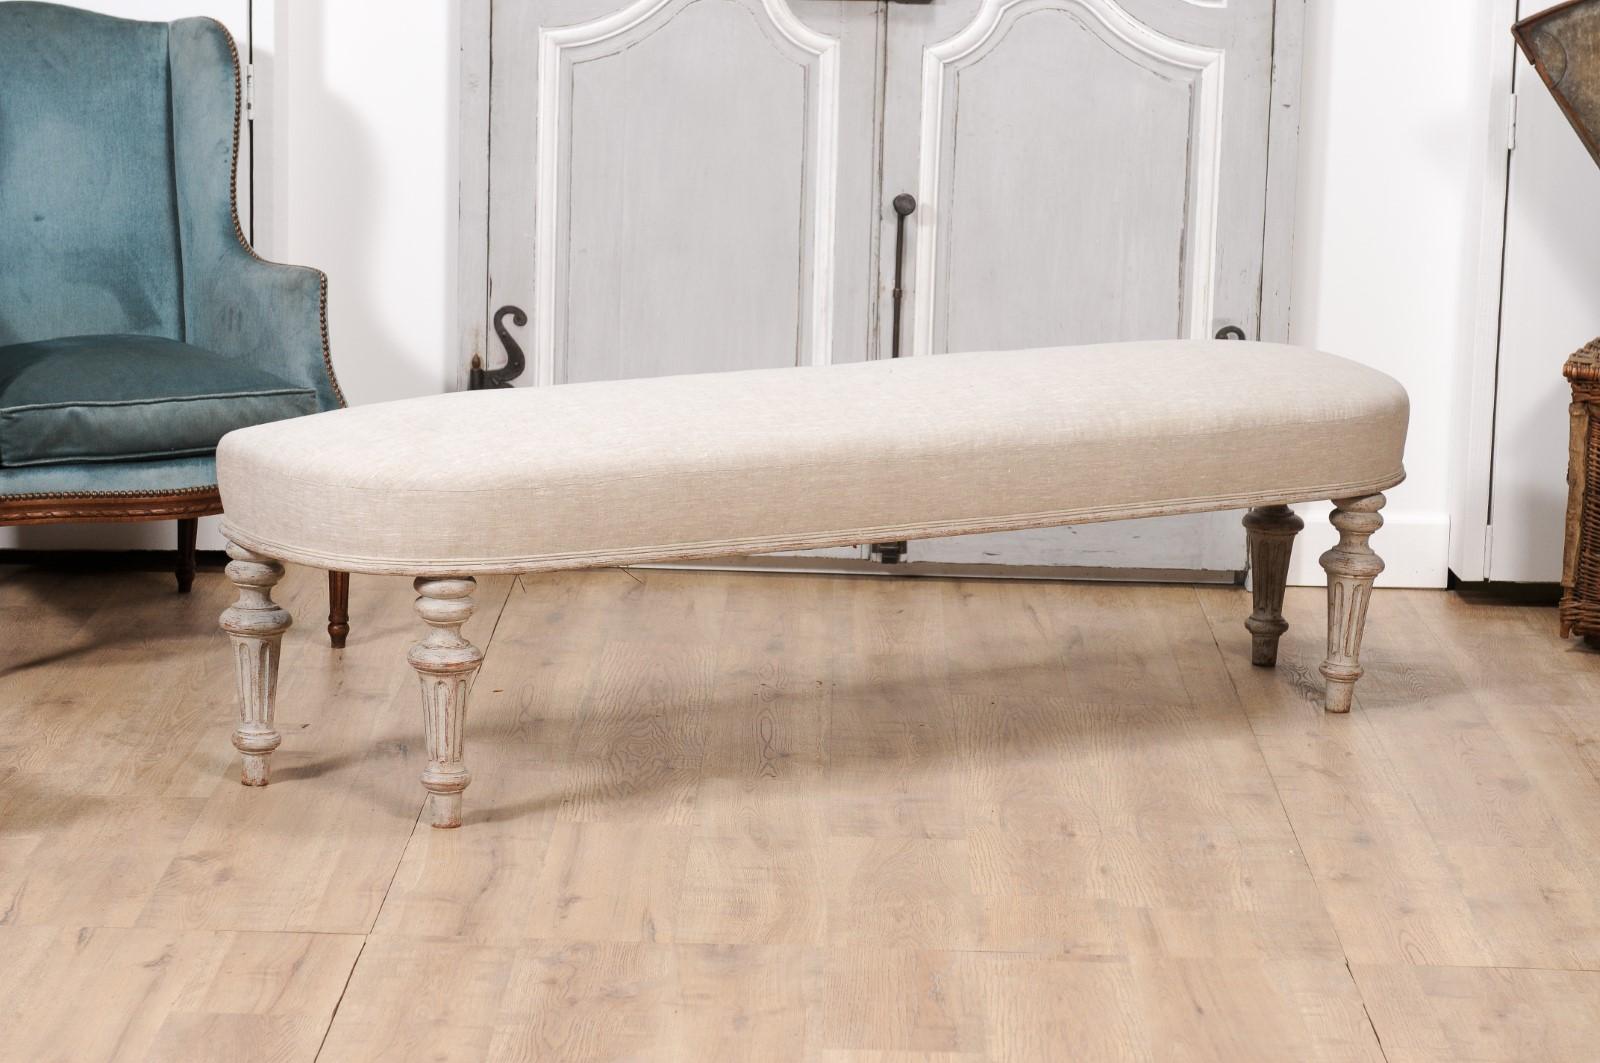 A Swedish Neoclassical style painted wood bench from circa 1860 with carved fluted legs and distressed finish. Embracing the exquisite subtlety of Swedish Neoclassical design, this painted wood bench from circa 1860 is an impeccable expression of